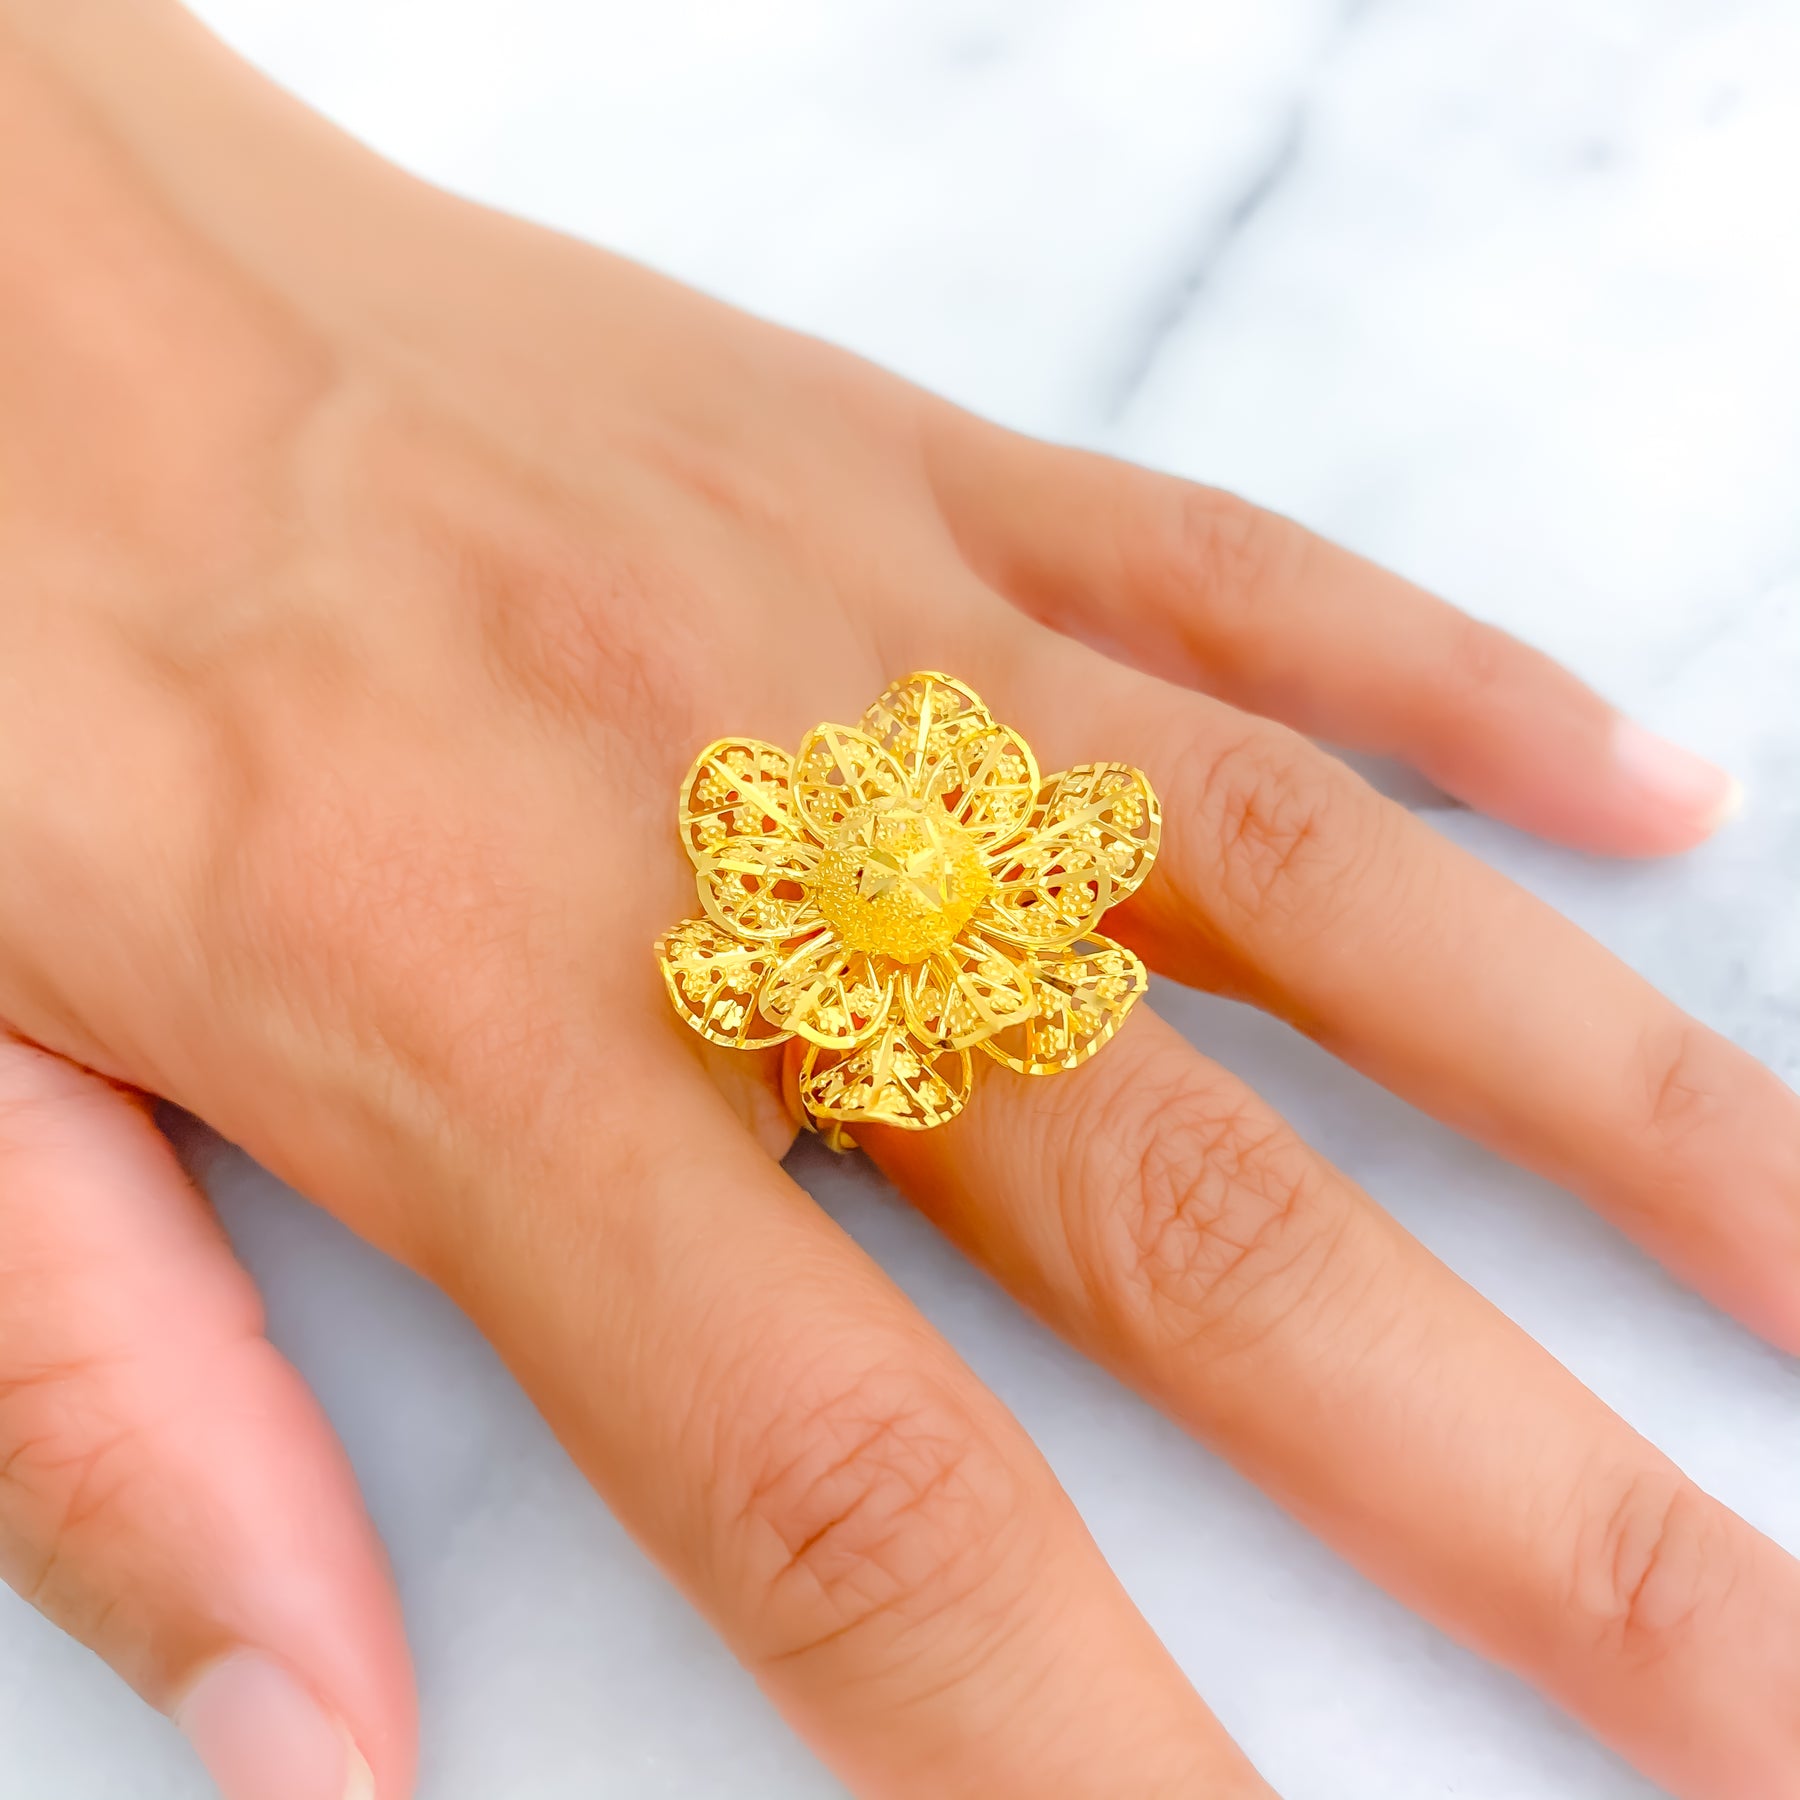 22k Ring Solid Gold Ring Ladies Jewelry Simple Floral Filigree Design R2045  | Royal Dubai Jewellers